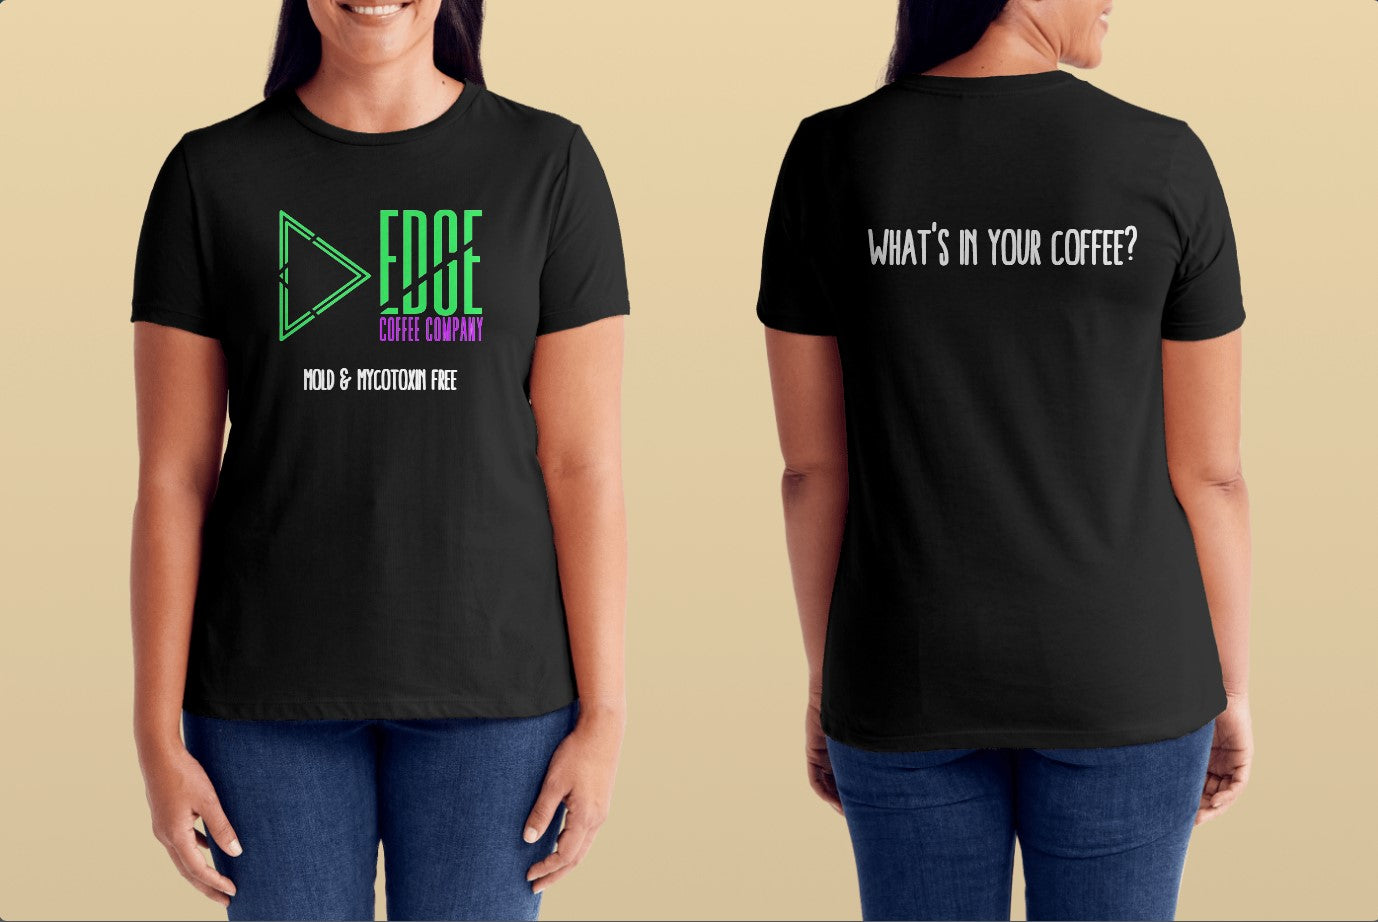 Edge T-Shirt - What's in your coffee?